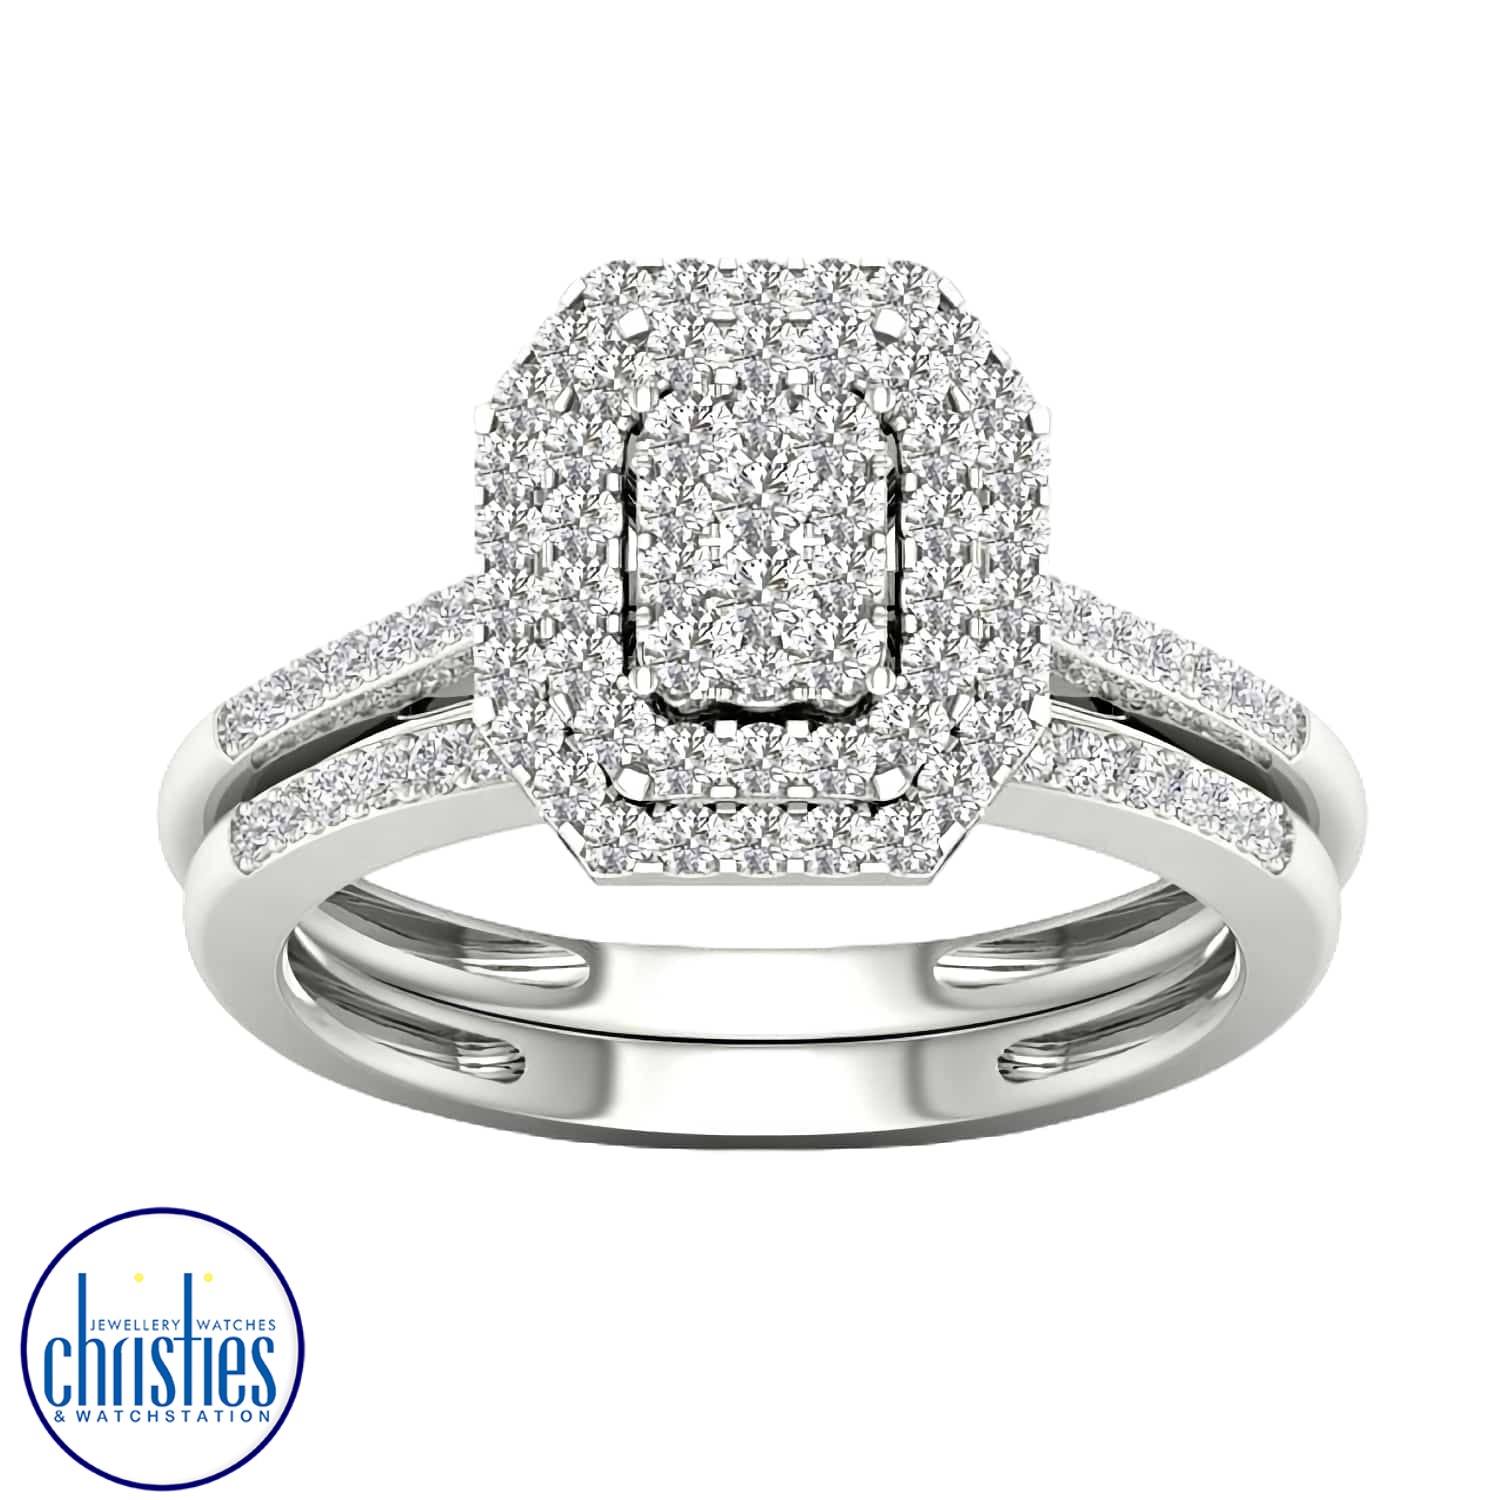 9ct White Gold Diamond Bridal Set 0.50ct TDW RB15458. A 9ct White Gold Diamond Bridal Set 0.50ct TDW Humm - Buy ‘Big things over $1000’ - Get approved online or in-store for up to $10,000. Depending on what you buy repay over 6, 9, 12 months all the way t